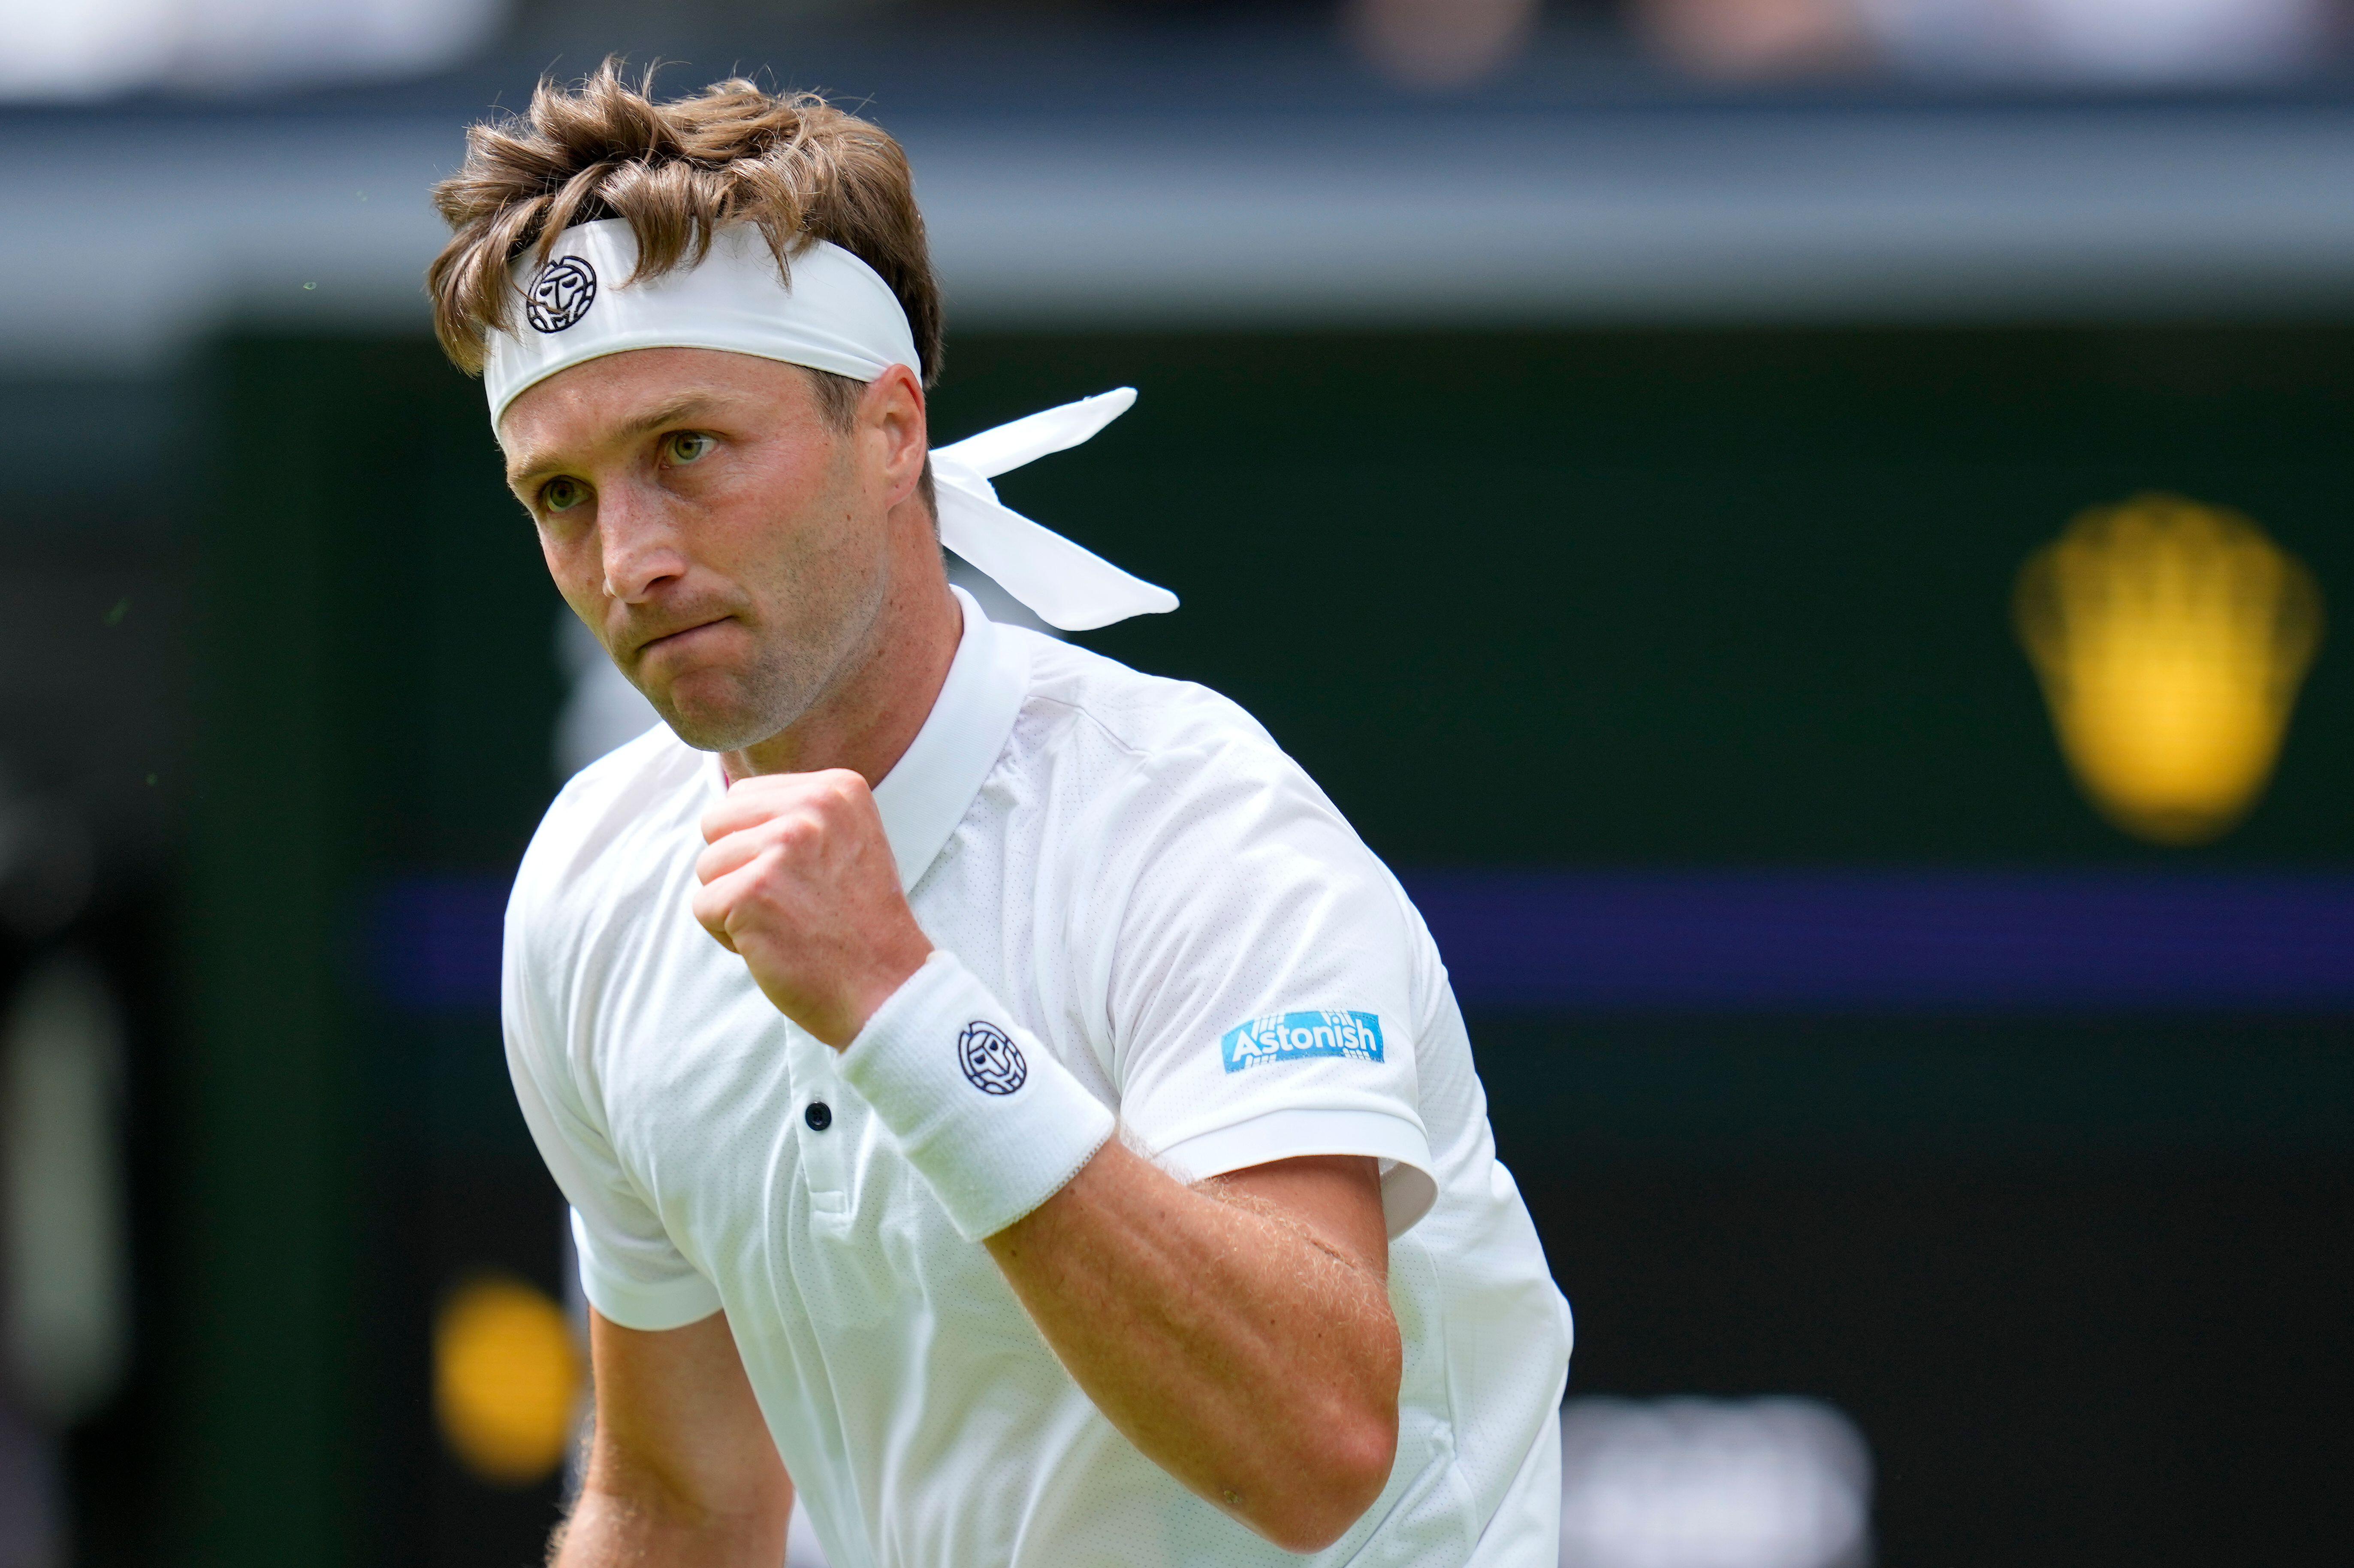 Liam Broady Breaks Into Top 100 For First Time, ATP Tour